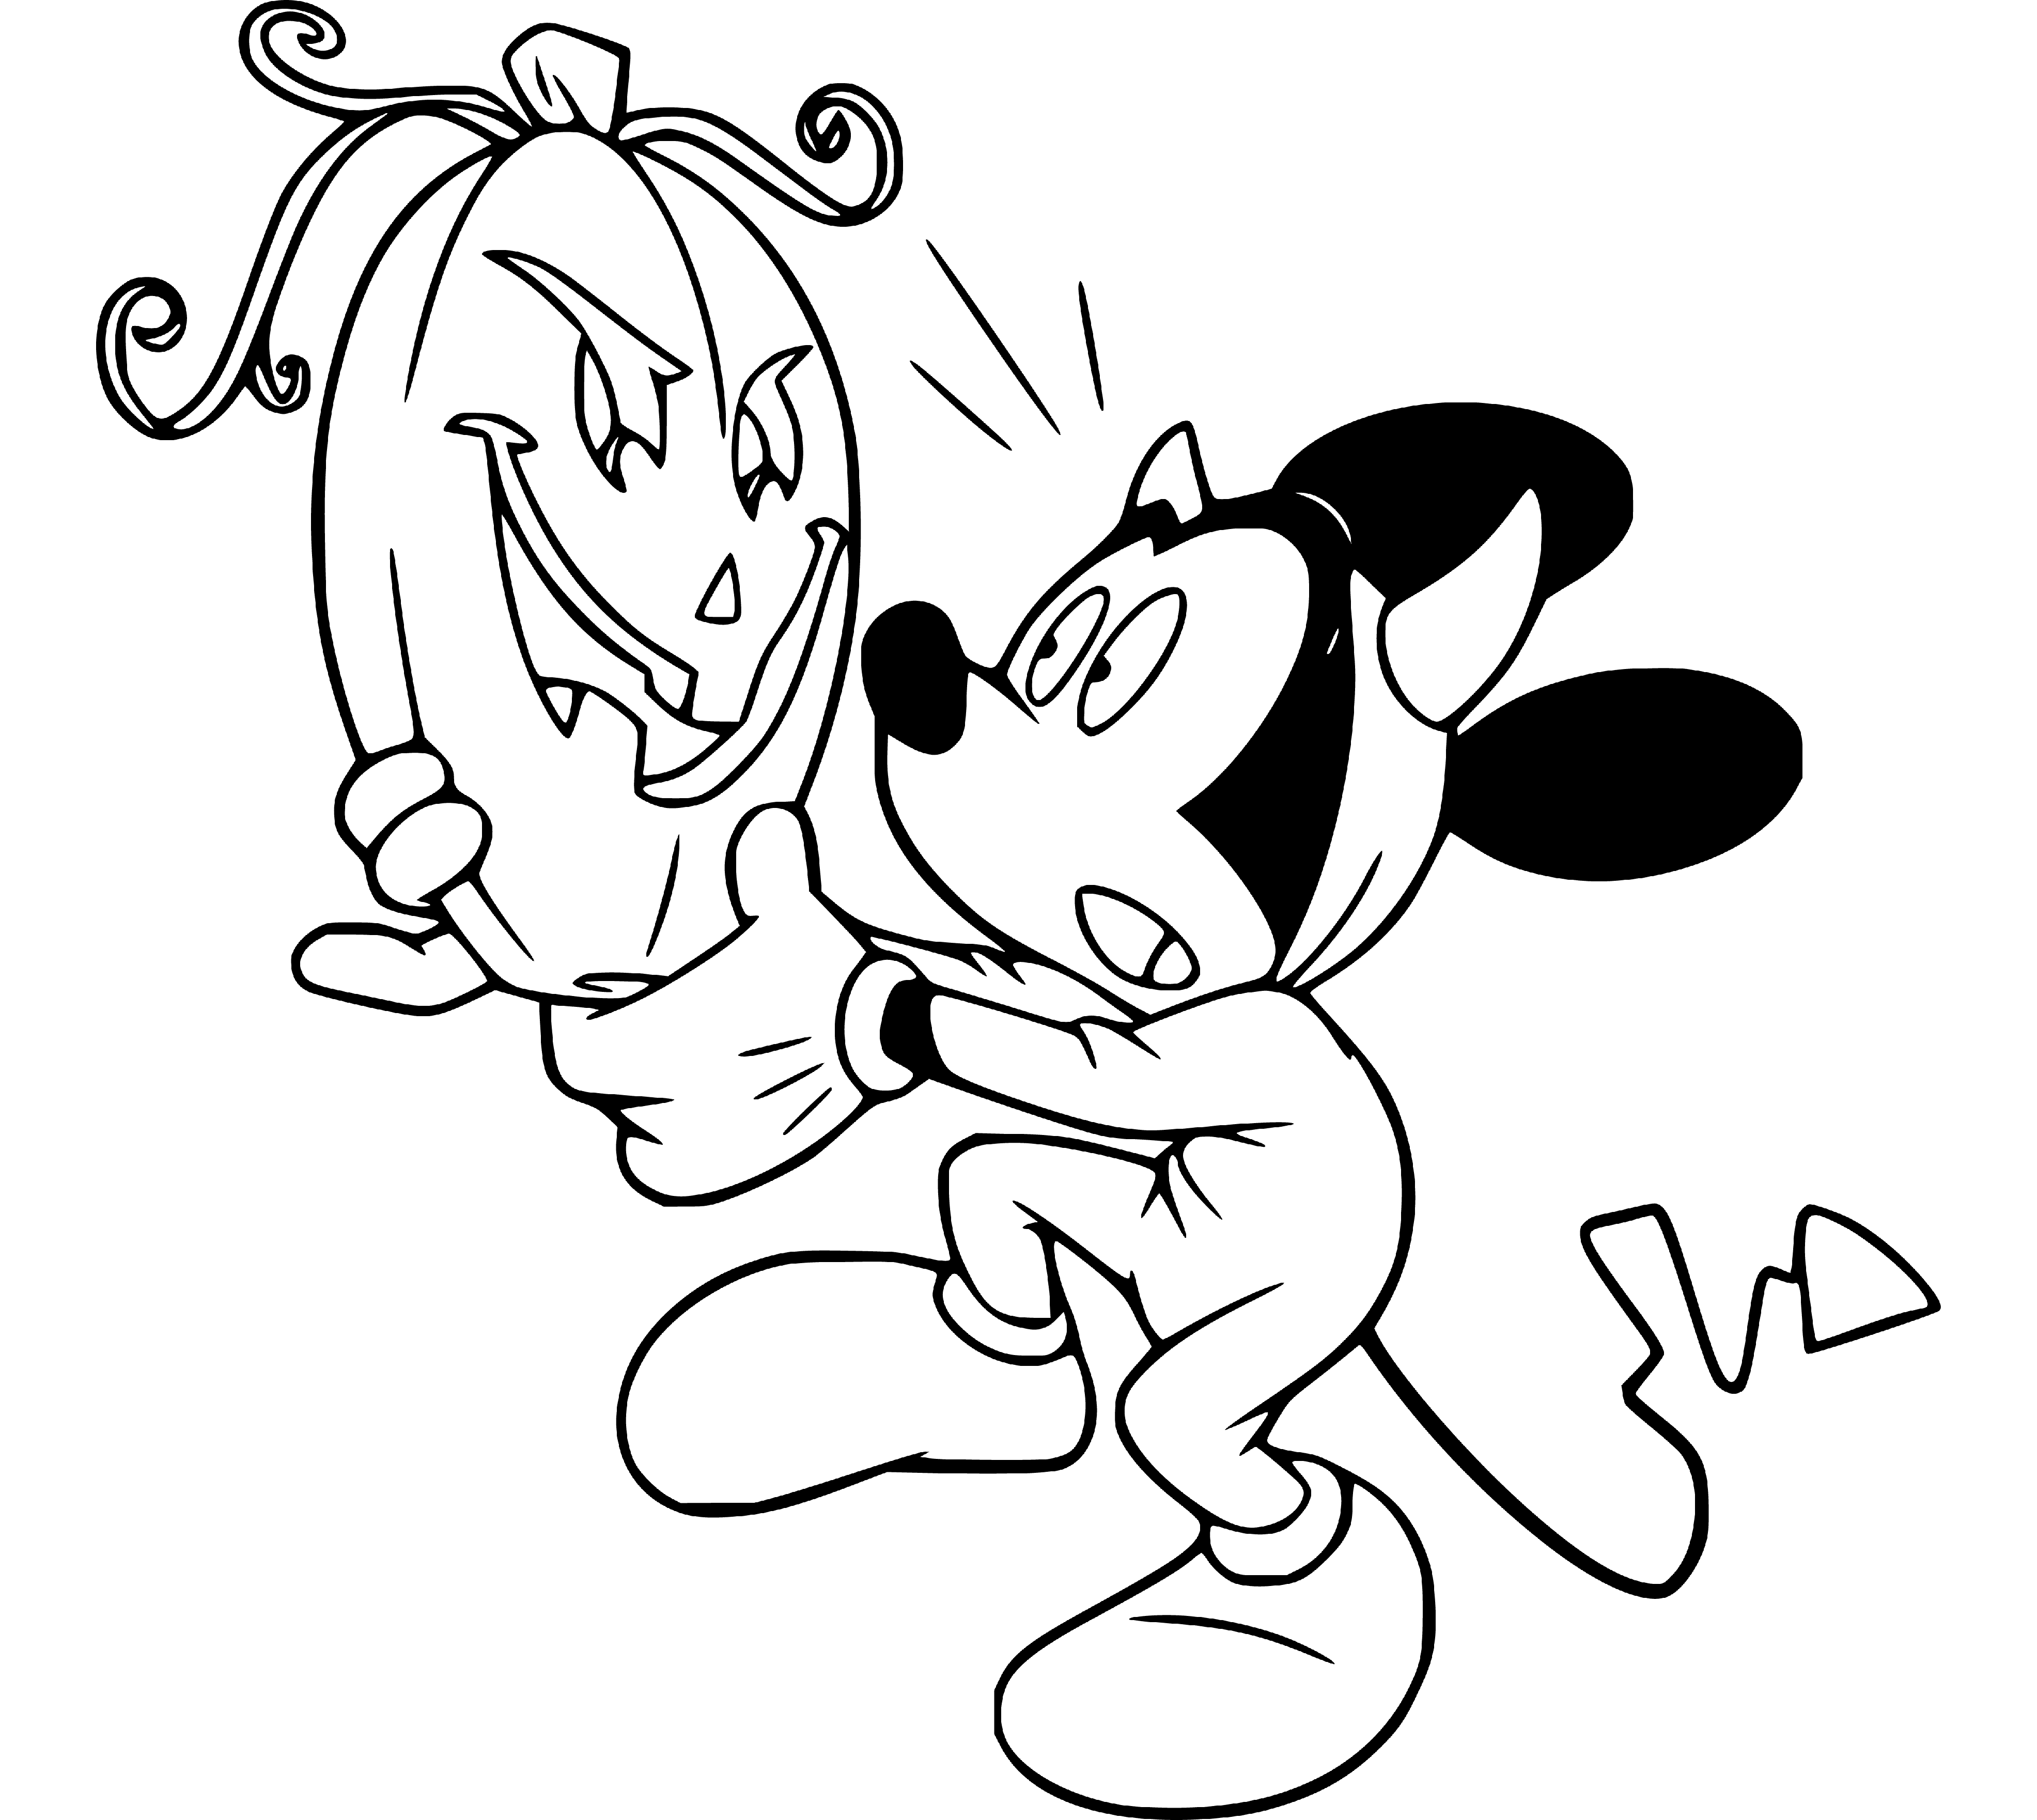 Printable Mickey Mouse afraid of Halloween Coloring Page for kids.